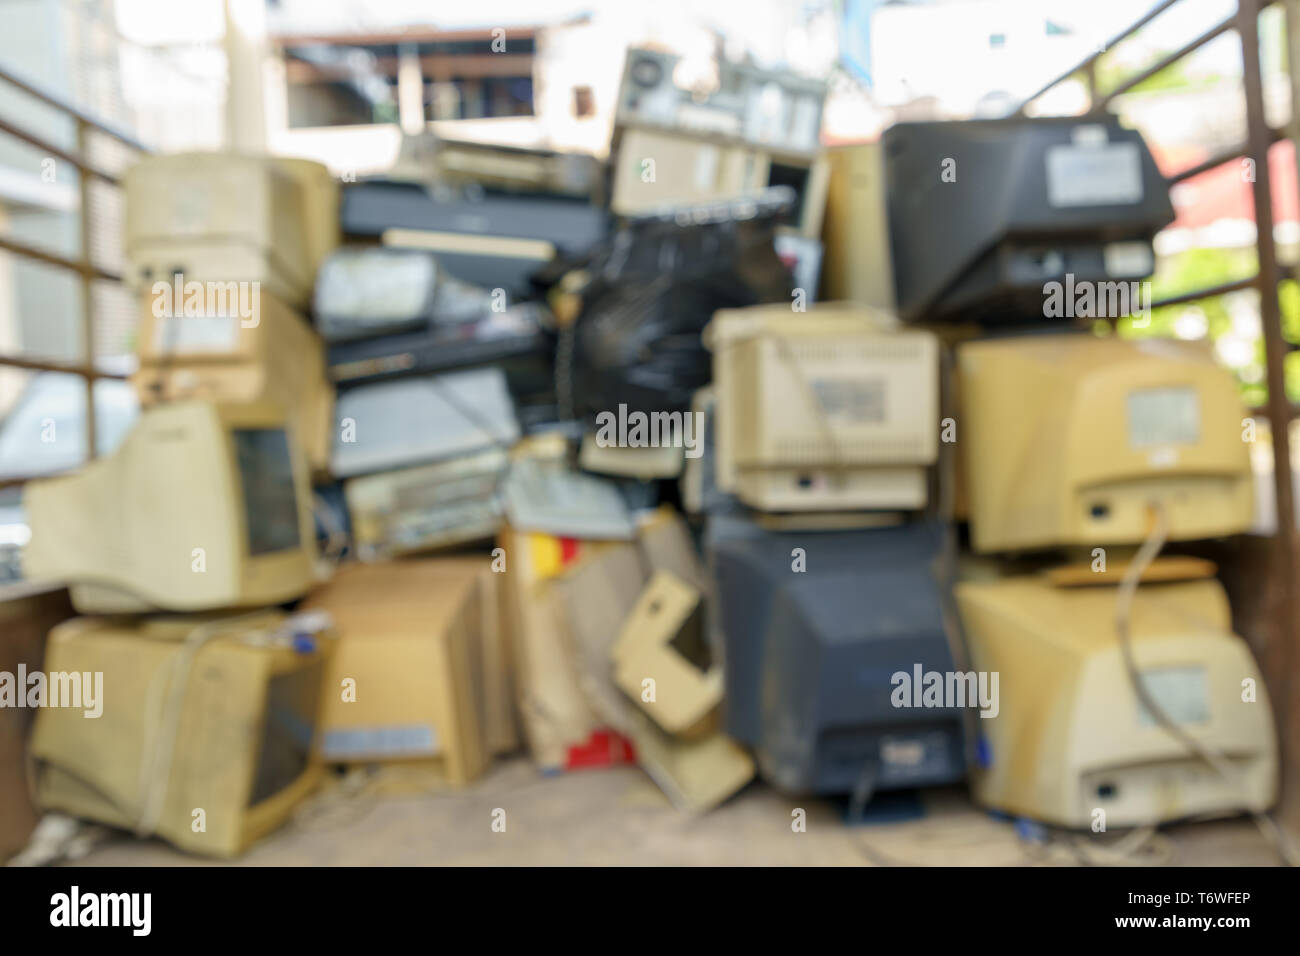 Abstract blur electronic waste stack together Monitor, Printer, desktop computer, fax for waiting to be recycled. Produced from plastic, copper, glass Stock Photo